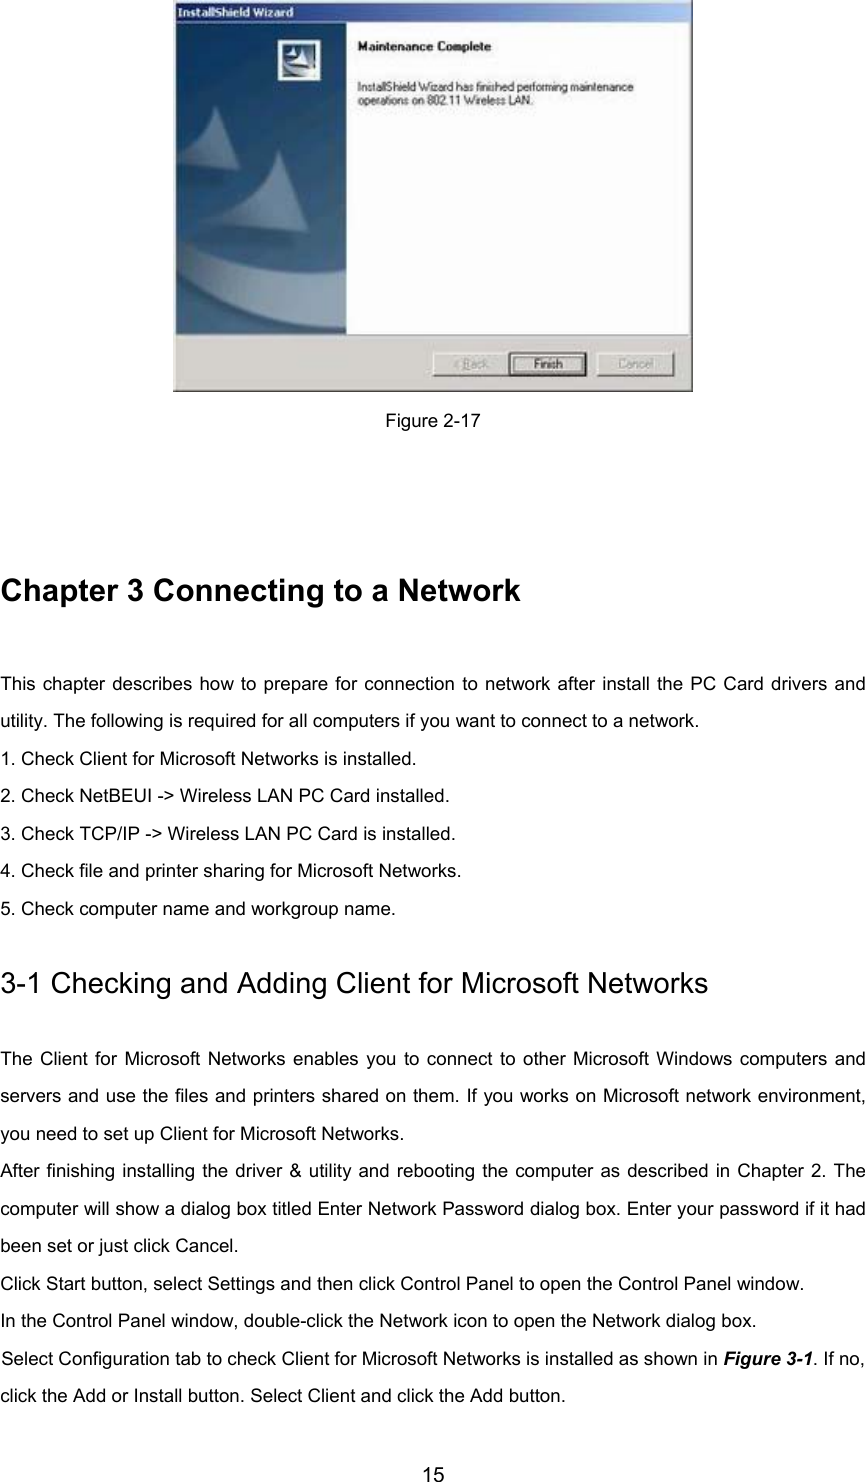 15Figure 2-17Chapter 3 Connecting to a NetworkThis chapter describes how to prepare for connection to network after install the PC Card drivers andutility. The following is required for all computers if you want to connect to a network.1. Check Client for Microsoft Networks is installed.2. Check NetBEUI -&gt; Wireless LAN PC Card installed.3. Check TCP/IP -&gt; Wireless LAN PC Card is installed.4. Check file and printer sharing for Microsoft Networks.5. Check computer name and workgroup name.3-1 Checking and Adding Client for Microsoft NetworksThe Client for Microsoft Networks enables you to connect to other Microsoft Windows computers andservers and use the files and printers shared on them. If you works on Microsoft network environment,you need to set up Client for Microsoft Networks.After finishing installing the driver &amp; utility and rebooting the computer as described in Chapter 2. Thecomputer will show a dialog box titled Enter Network Password dialog box. Enter your password if it hadbeen set or just click Cancel.Click Start button, select Settings and then click Control Panel to open the Control Panel window.In the Control Panel window, double-click the Network icon to open the Network dialog box.Select Configuration tab to check Client for Microsoft Networks is installed as shown in Figure 3-1. If no,click the Add or Install button. Select Client and click the Add button.